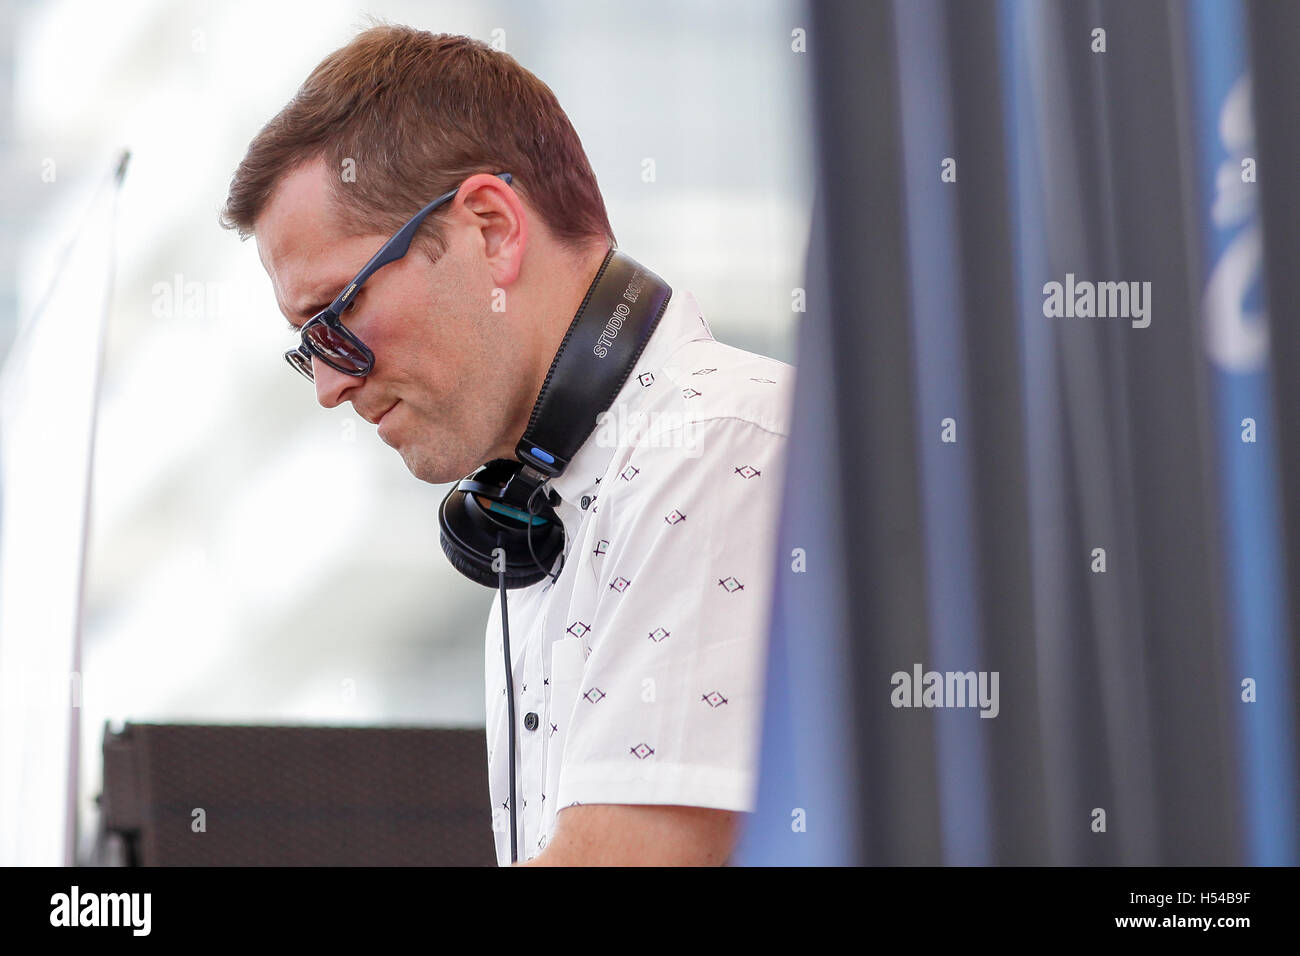 DJ Kaskade at the Sirius XM Music Lounge on March 18, 2016 at the 1 Hotel South Beach at the Private Beach Club in Miami Beach, Florida. Stock Photo